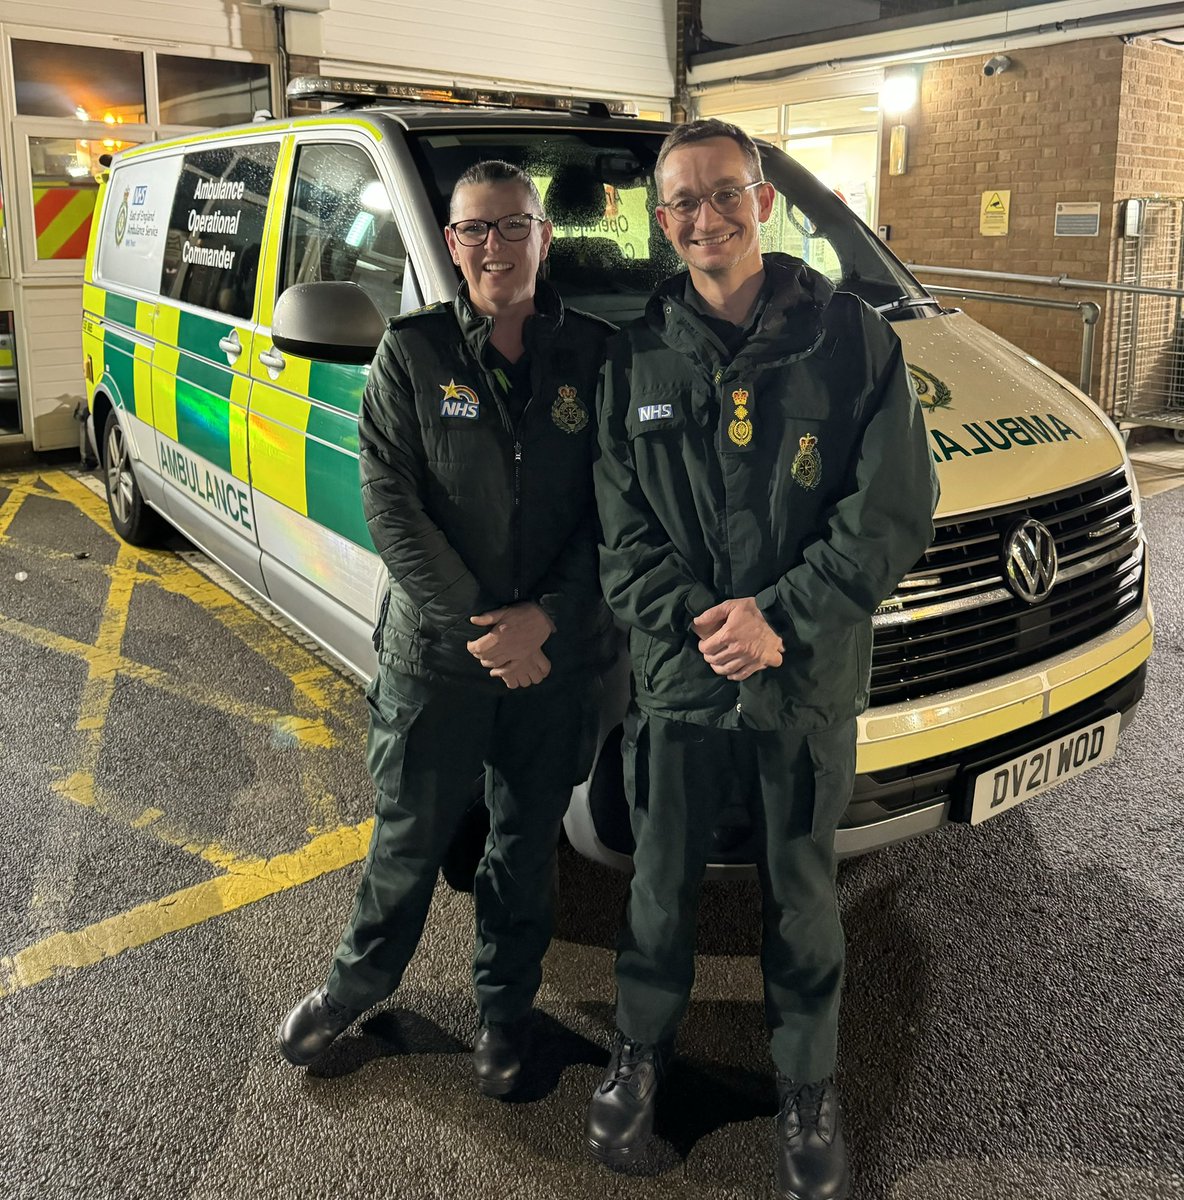 It’s been a busy night shift with @shaweesther - lots of fantastic care by #TeamEEAST and great collaboration with colleagues @EssexPoliceUK Big thanks to everyone @eastenglandamb keeping our communities safe this Christmas, and wishing everyone a safe and happy Christmas 🎄